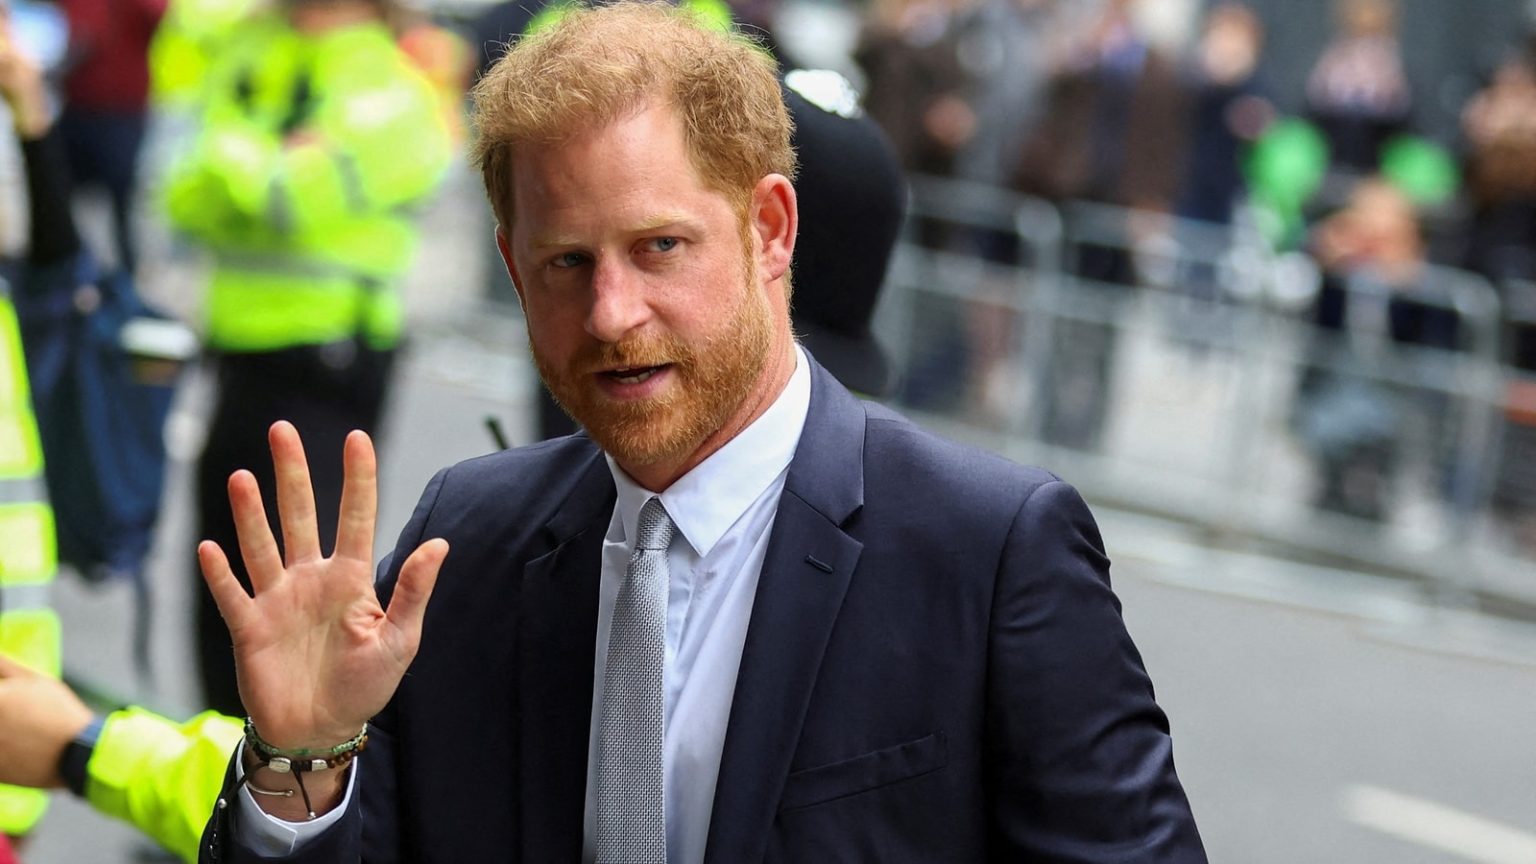 Prince Harry appears woefully pensive after unexpected appearance at